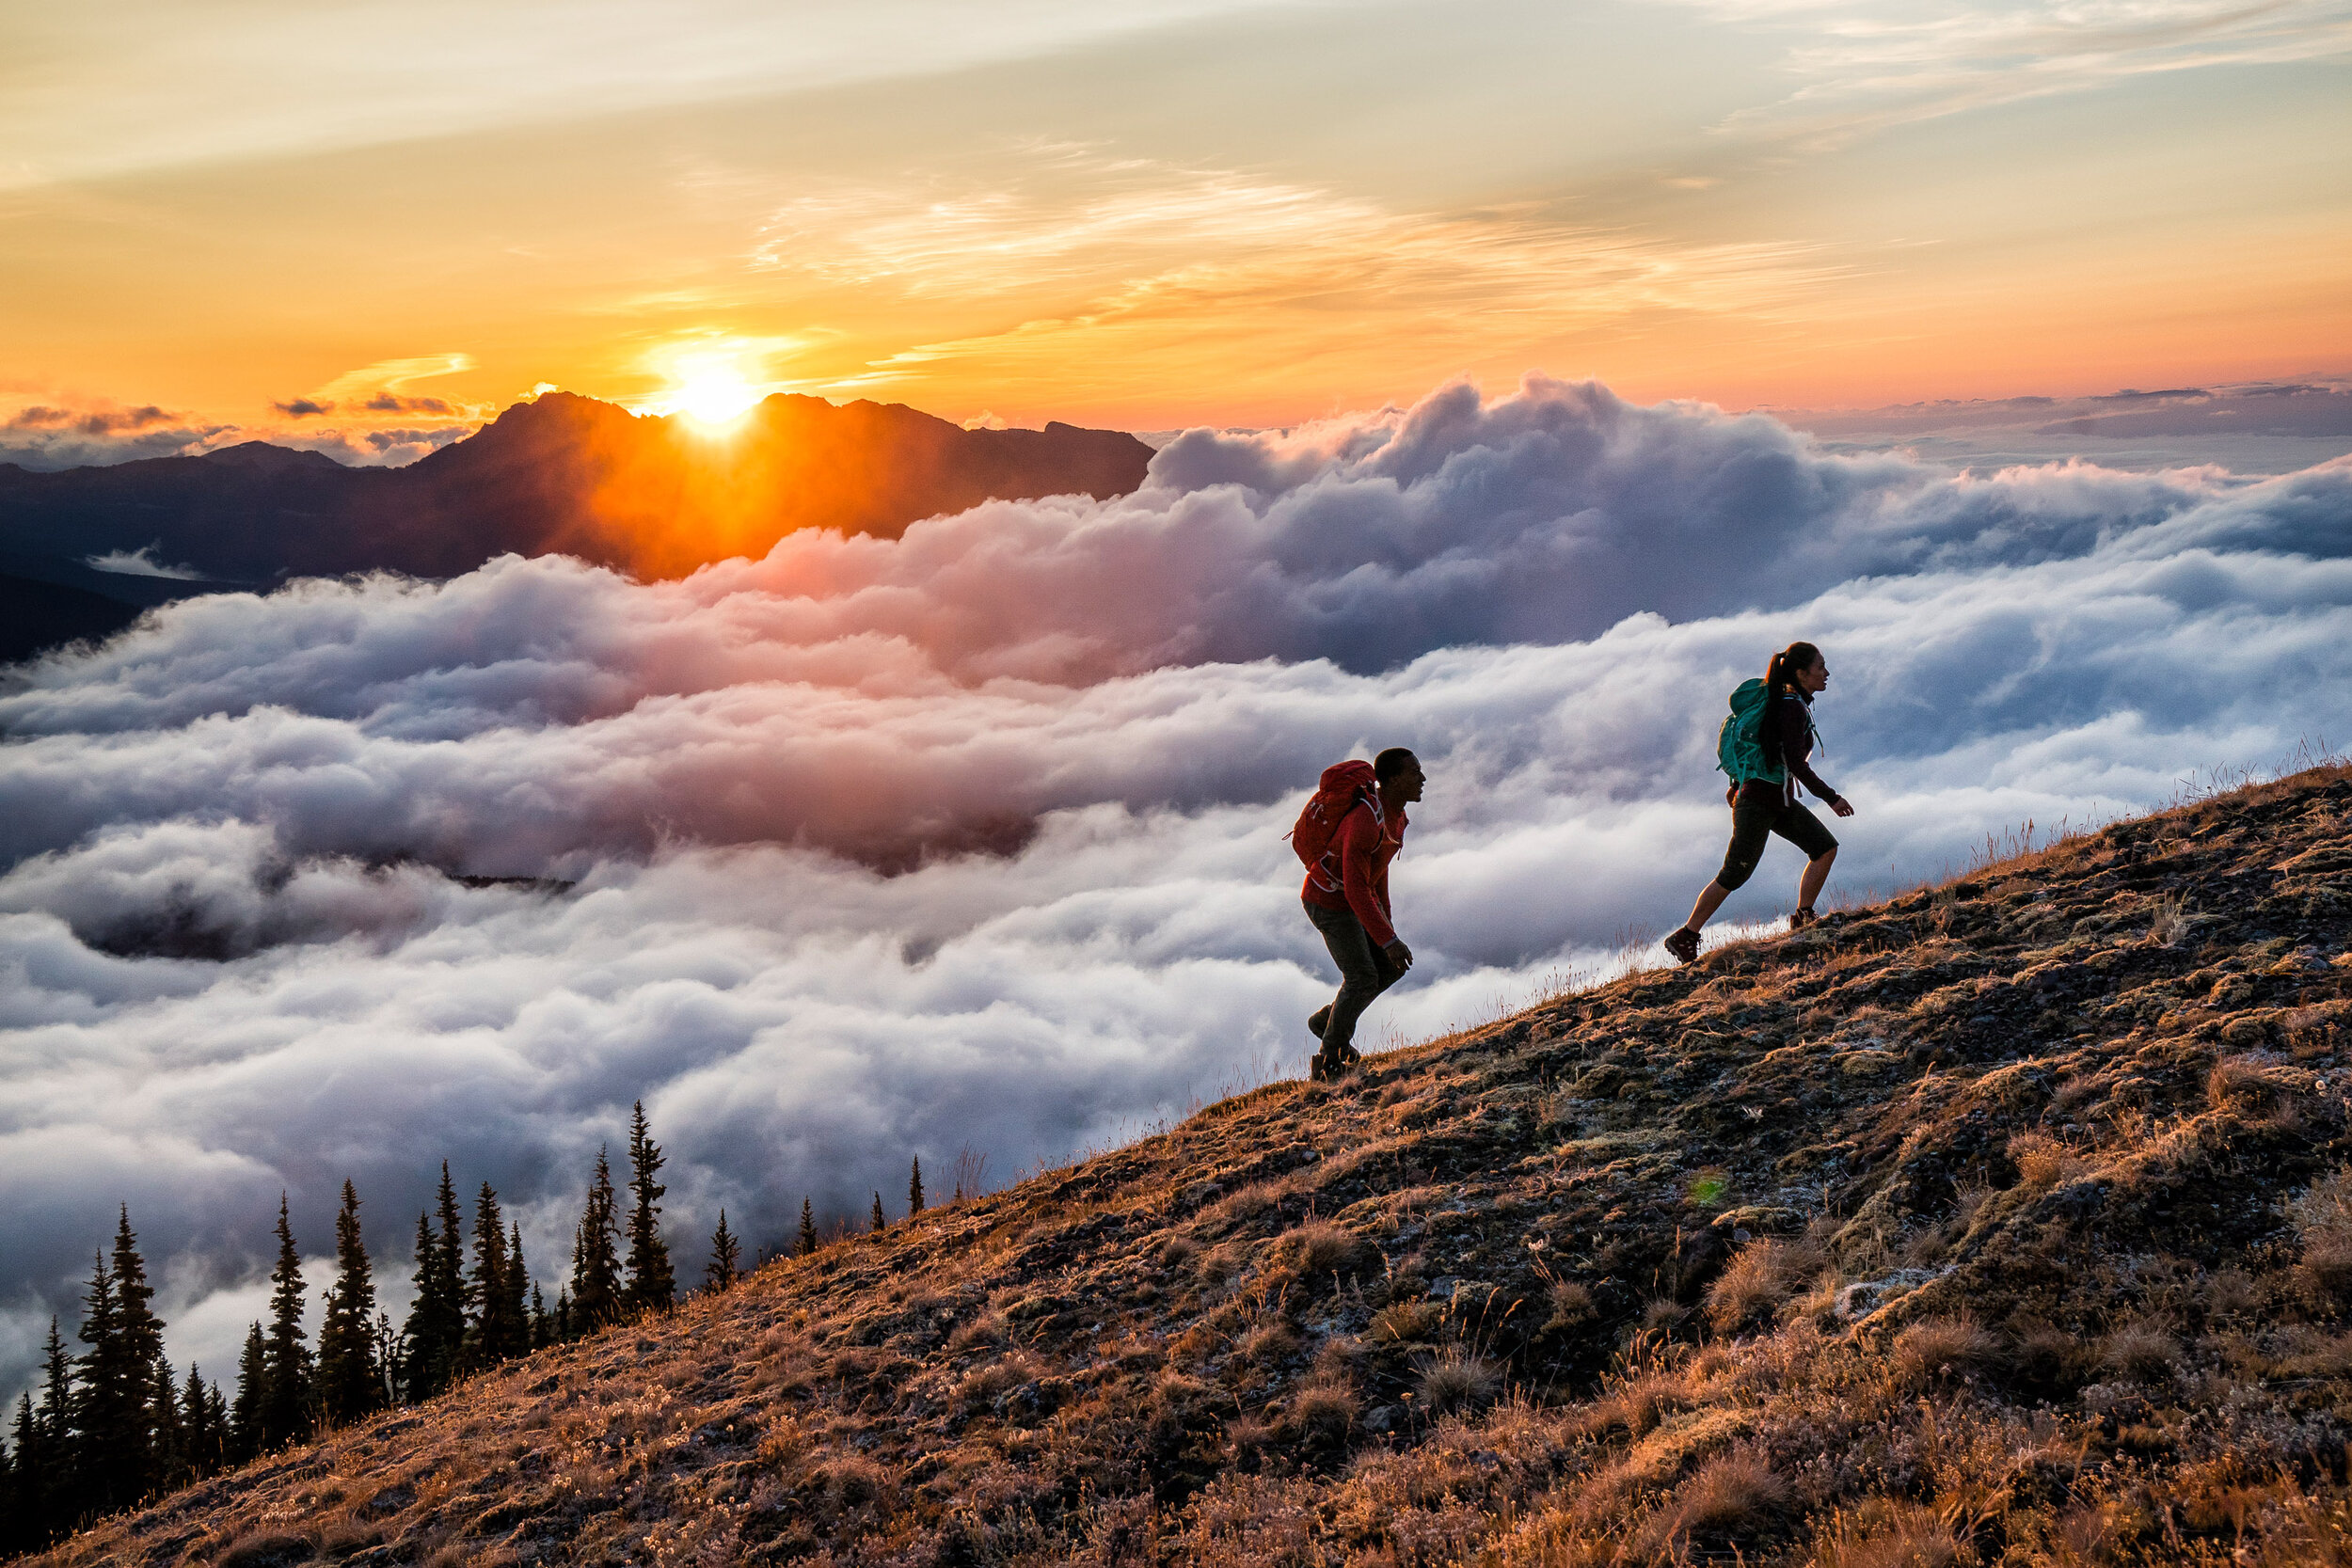  Adventure: A man and woman hiking in the clouds at sunset, Olympic National Park, Washington 